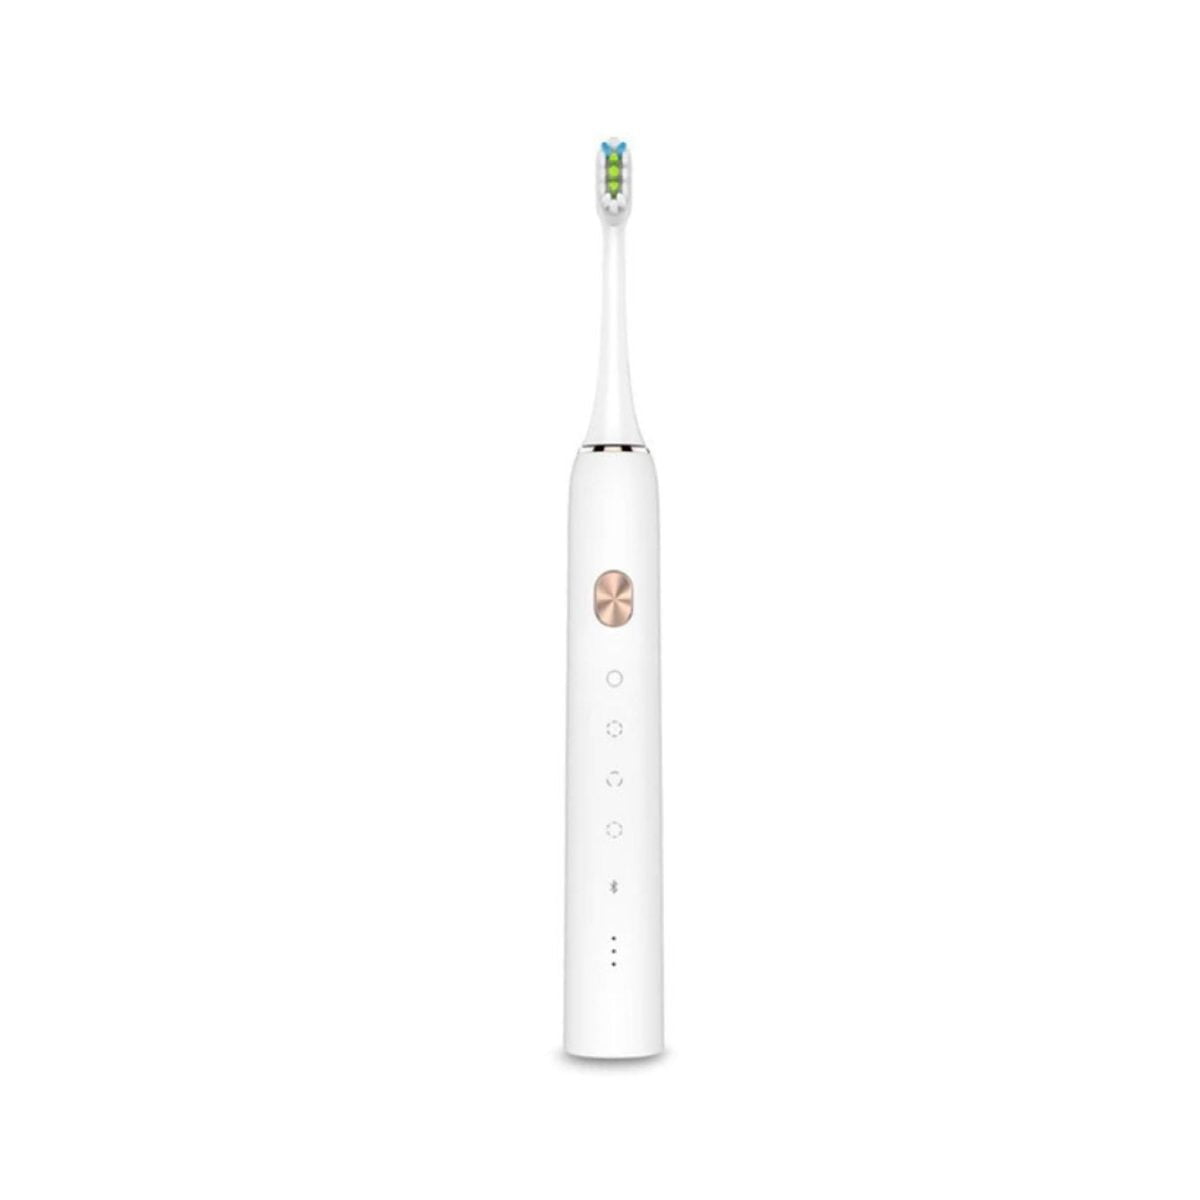 Waswhite 01 Scaled Xiaomi Xiaomi Toothbrush Soocare X3U, Soocas Upgraded Electric Sonic Vibration Waterproof Lightning-Fast Charging 2020 Newest Version [Video Width=&Amp;Quot;1280&Amp;Quot; Height=&Amp;Quot;720&Amp;Quot; Mp4=&Amp;Quot;Https://Lablaab.com/Wp-Content/Uploads/2020/05/Khn4Gzxy4Rcnwtethdd__Hd.mp4&Amp;Quot;][/Video] Soocas X3U Sonic Toothbrush Electric (White) 2020 Model